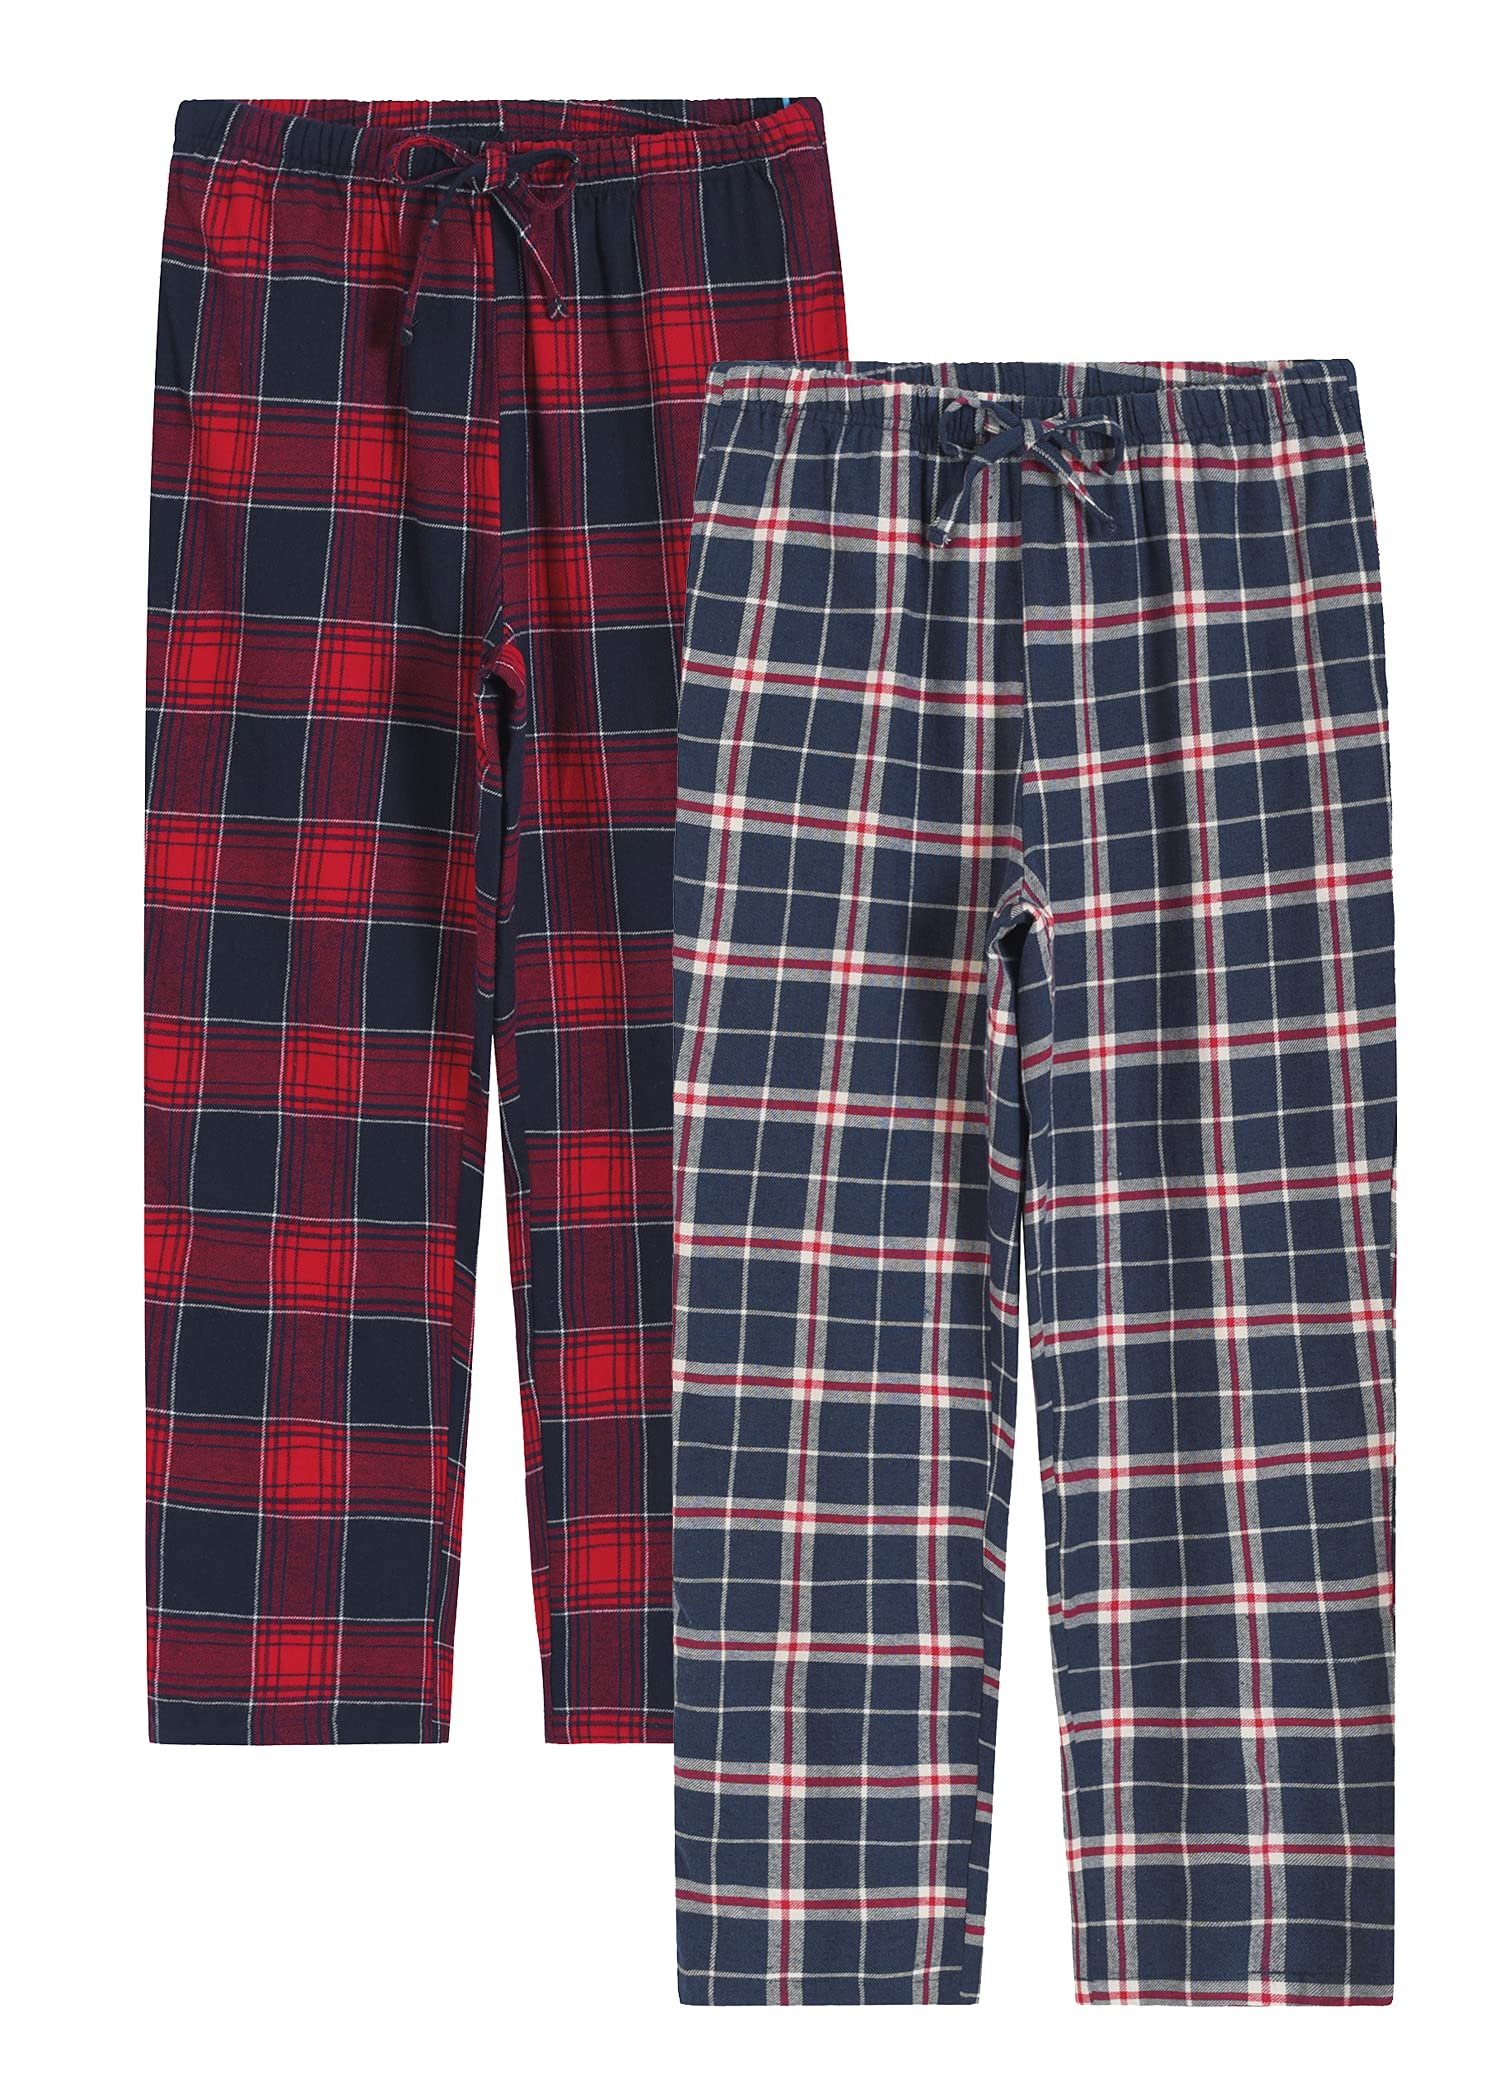 Adr Mens Cotton Flannel Pajama Pants With Pockets Red Buffalo Check Plaid  X Large  Target